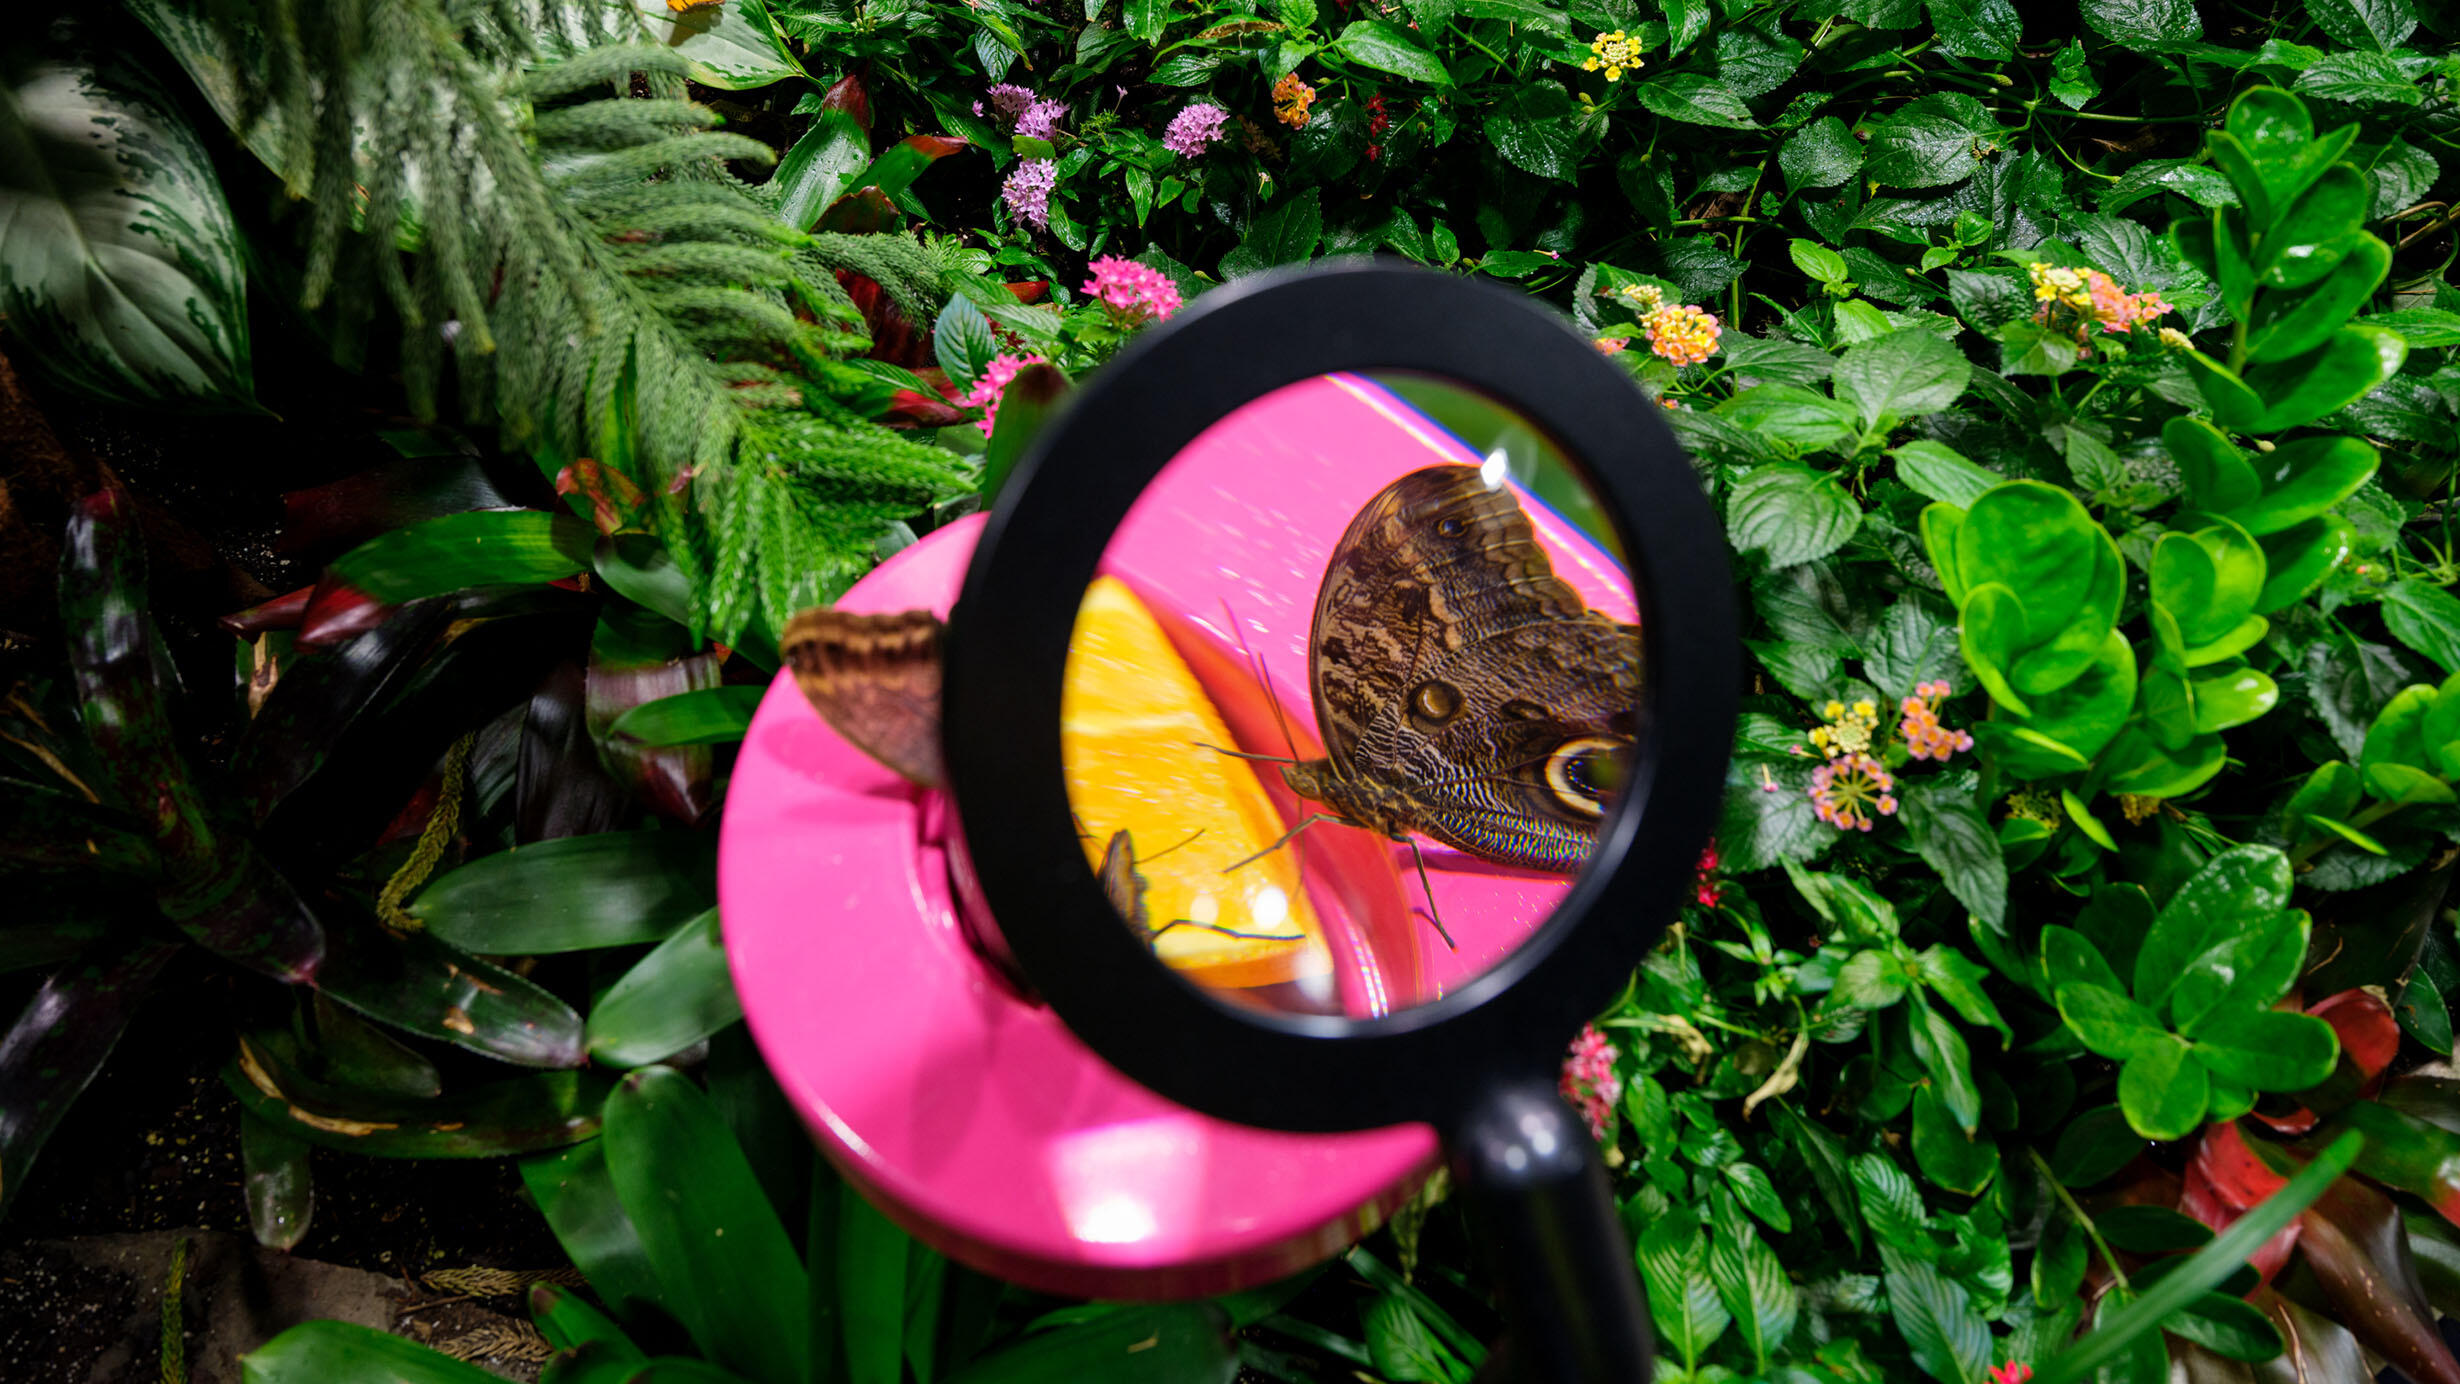 View through a magnifying glass shows a closeup of a butterfly feeding on an orange slice.